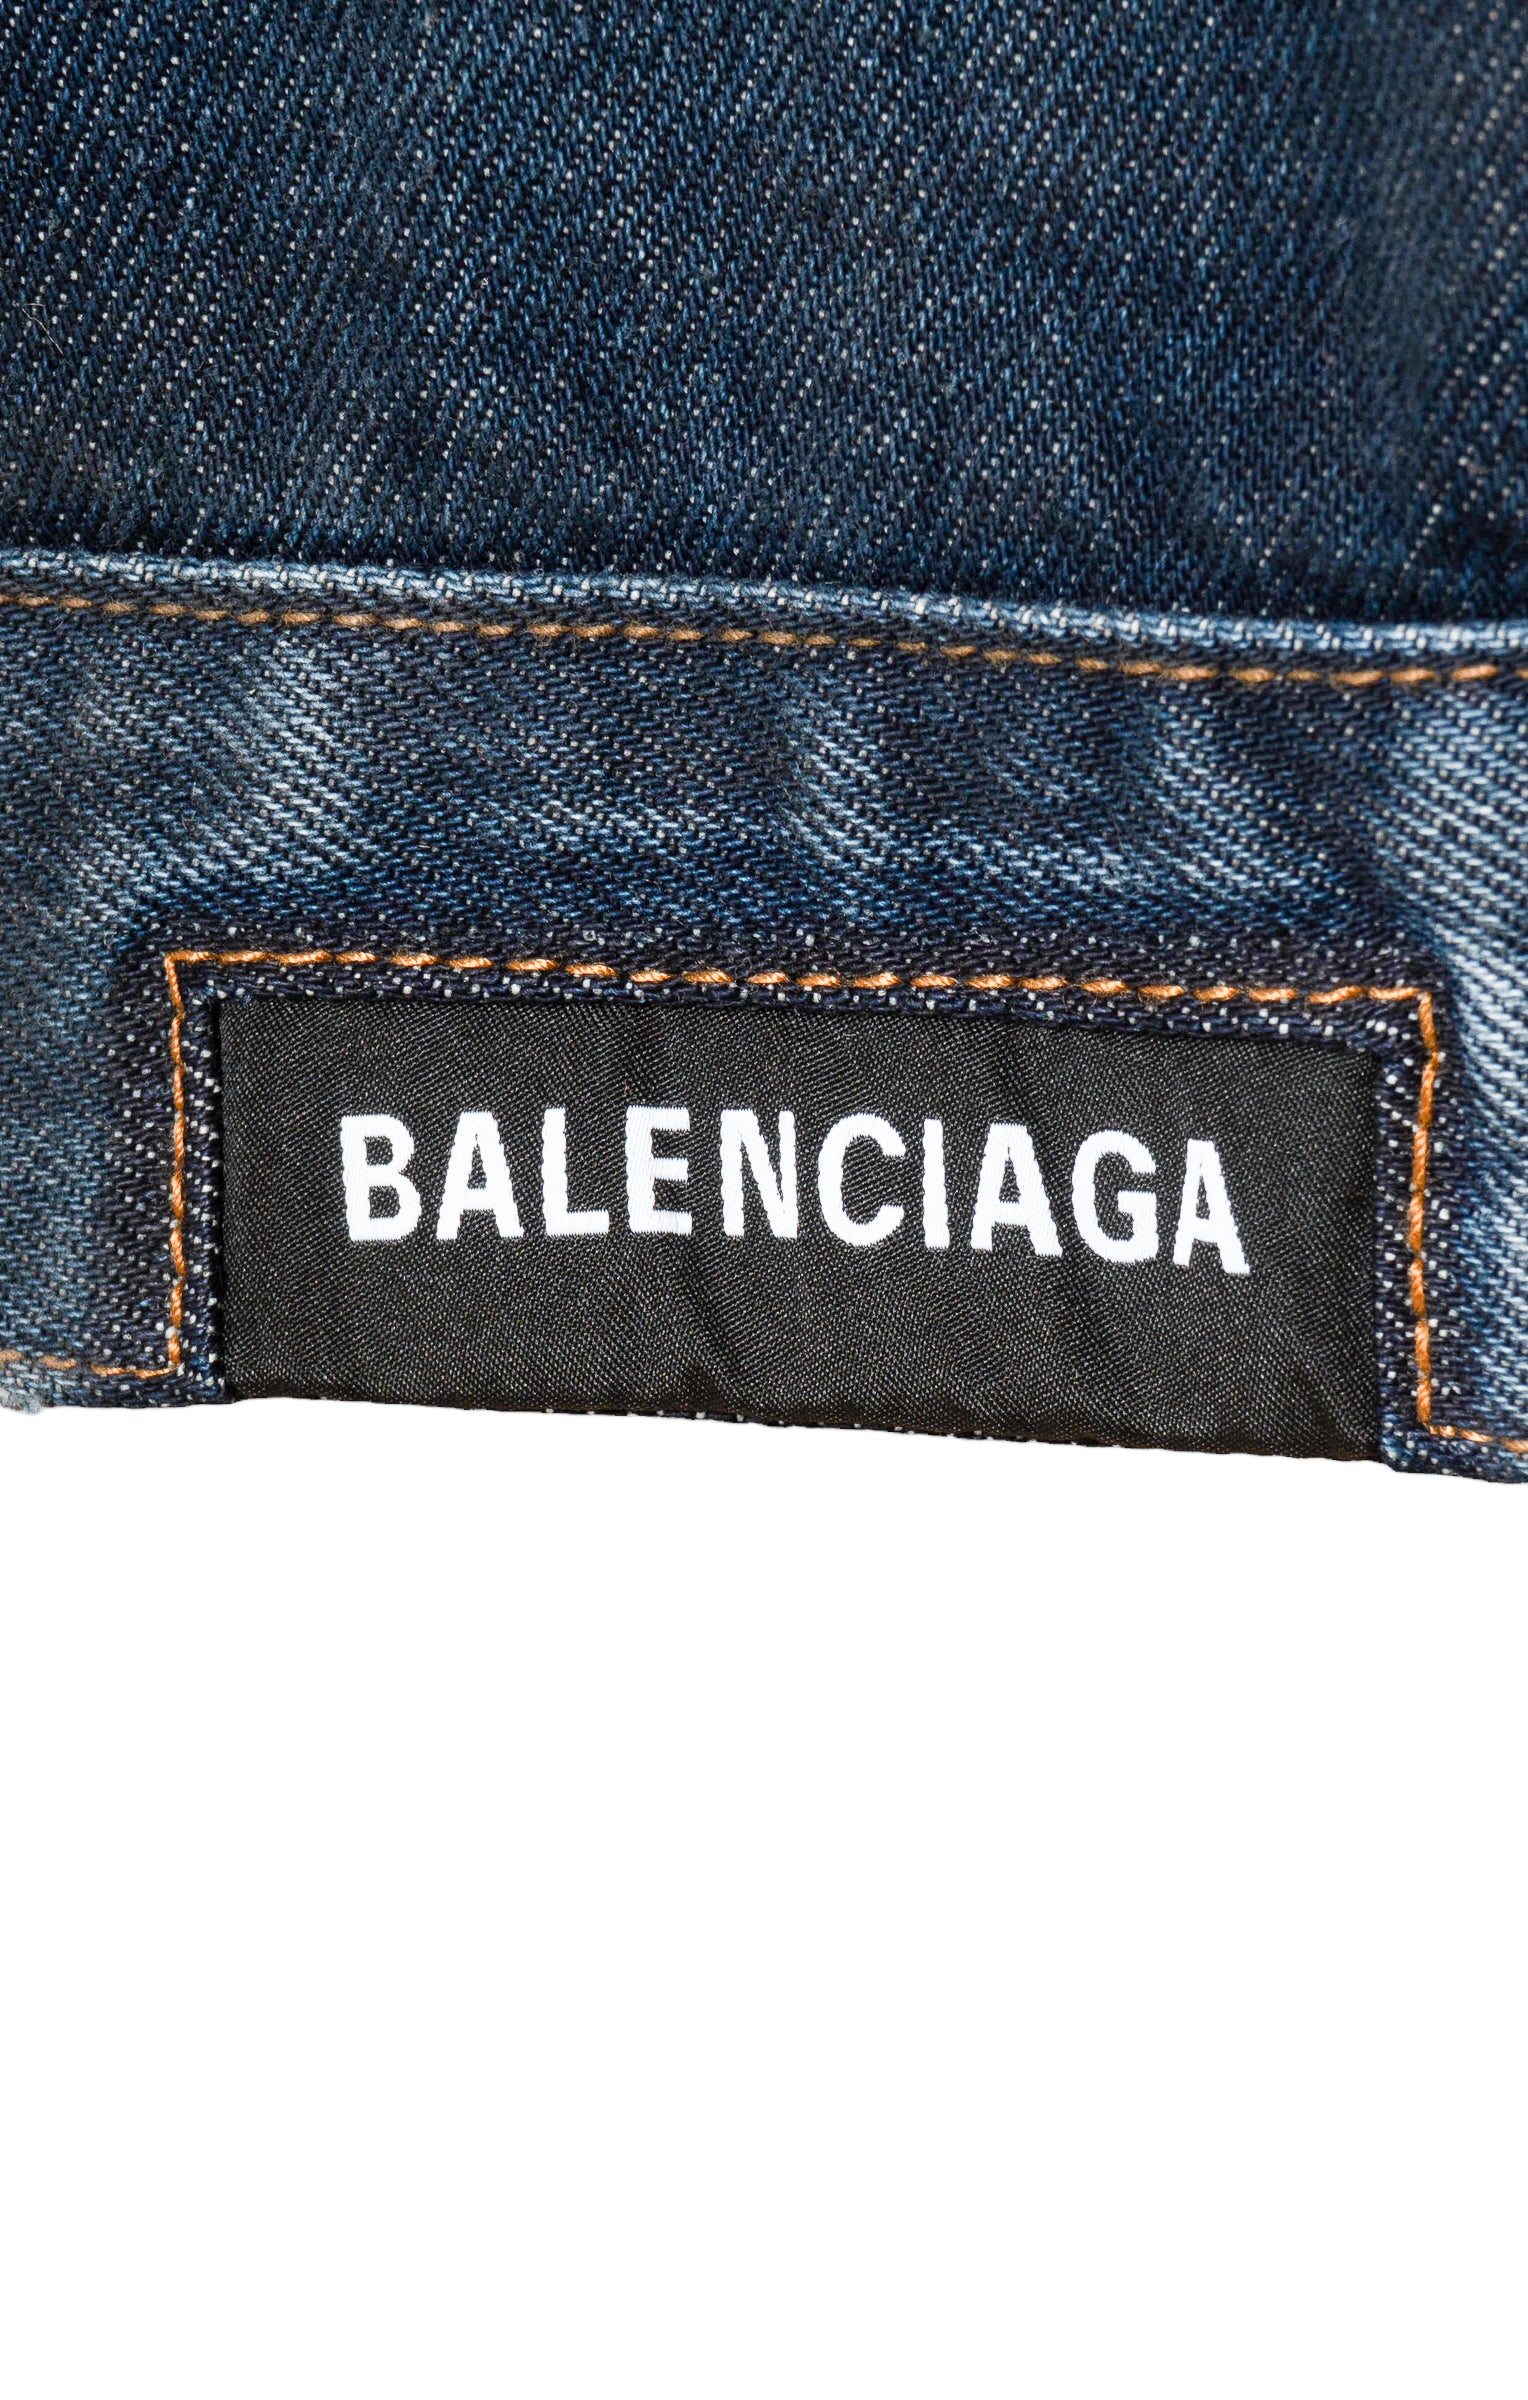 BALENCIAGA (NEW) with tags Jacket Size: FR 34 / Comparable to US 0-2